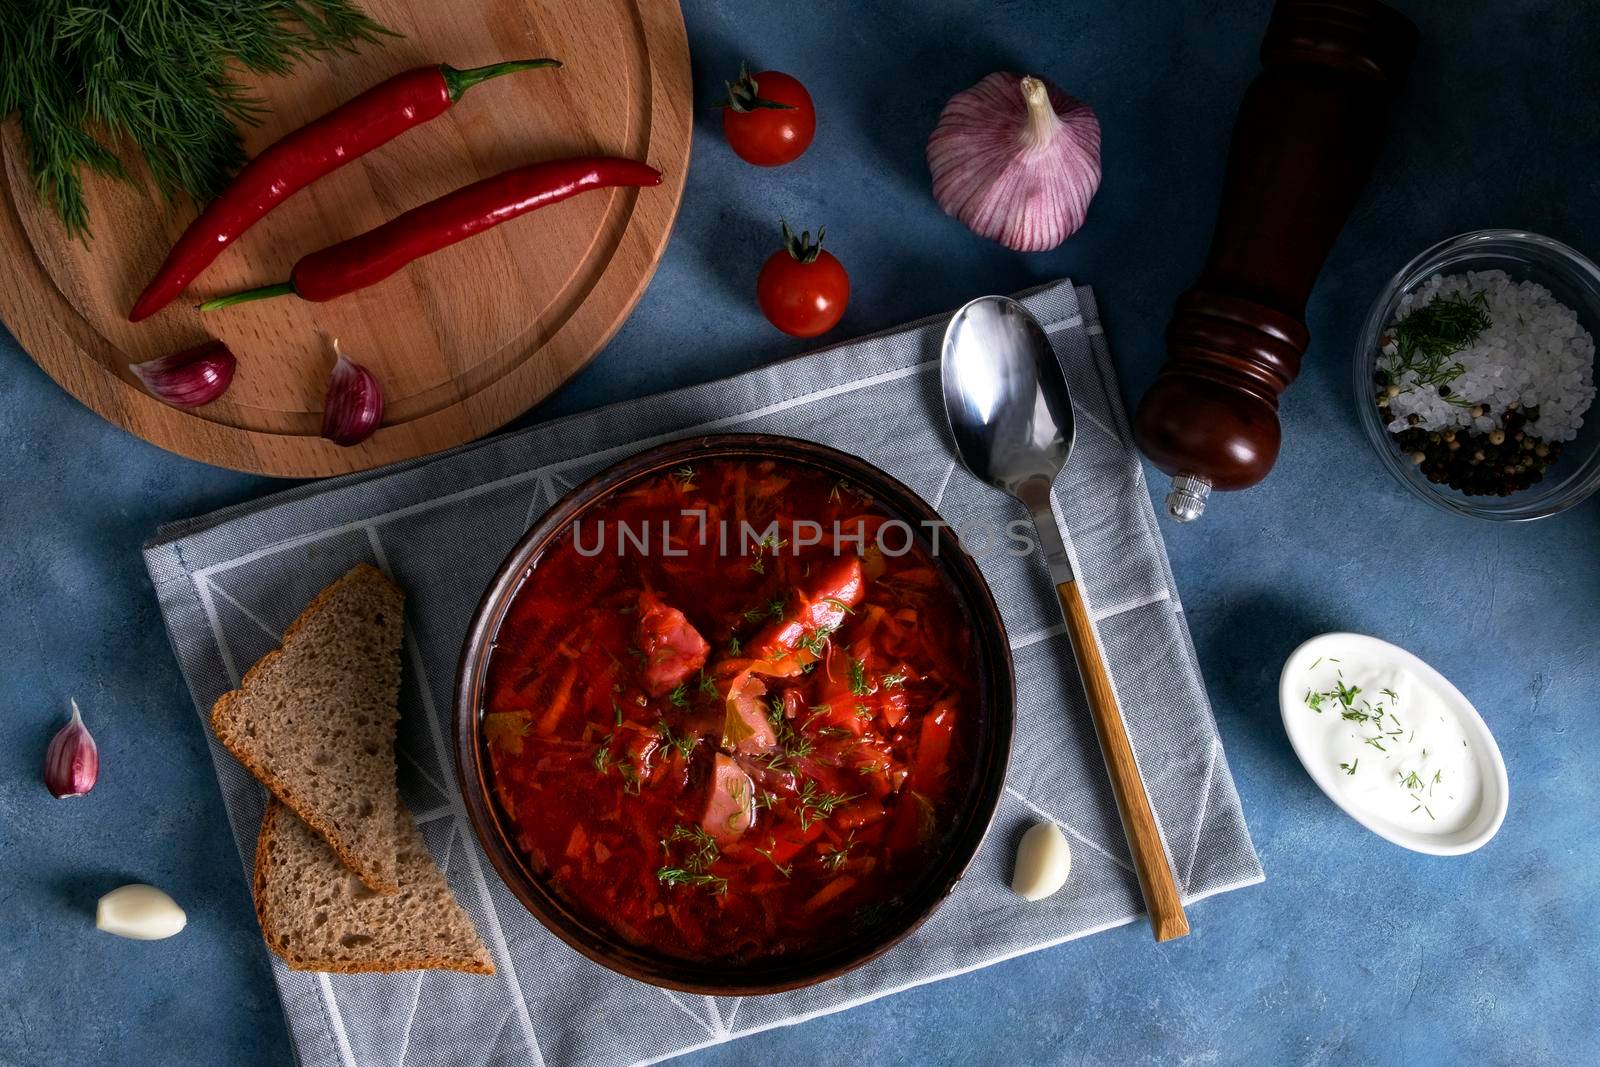 Top view of the traditional popular Russian soup borscht made from cabbage, beets and other vegetables served in a clay ceramic plate with sour cream and garlic. National cuisine. Selective focus.